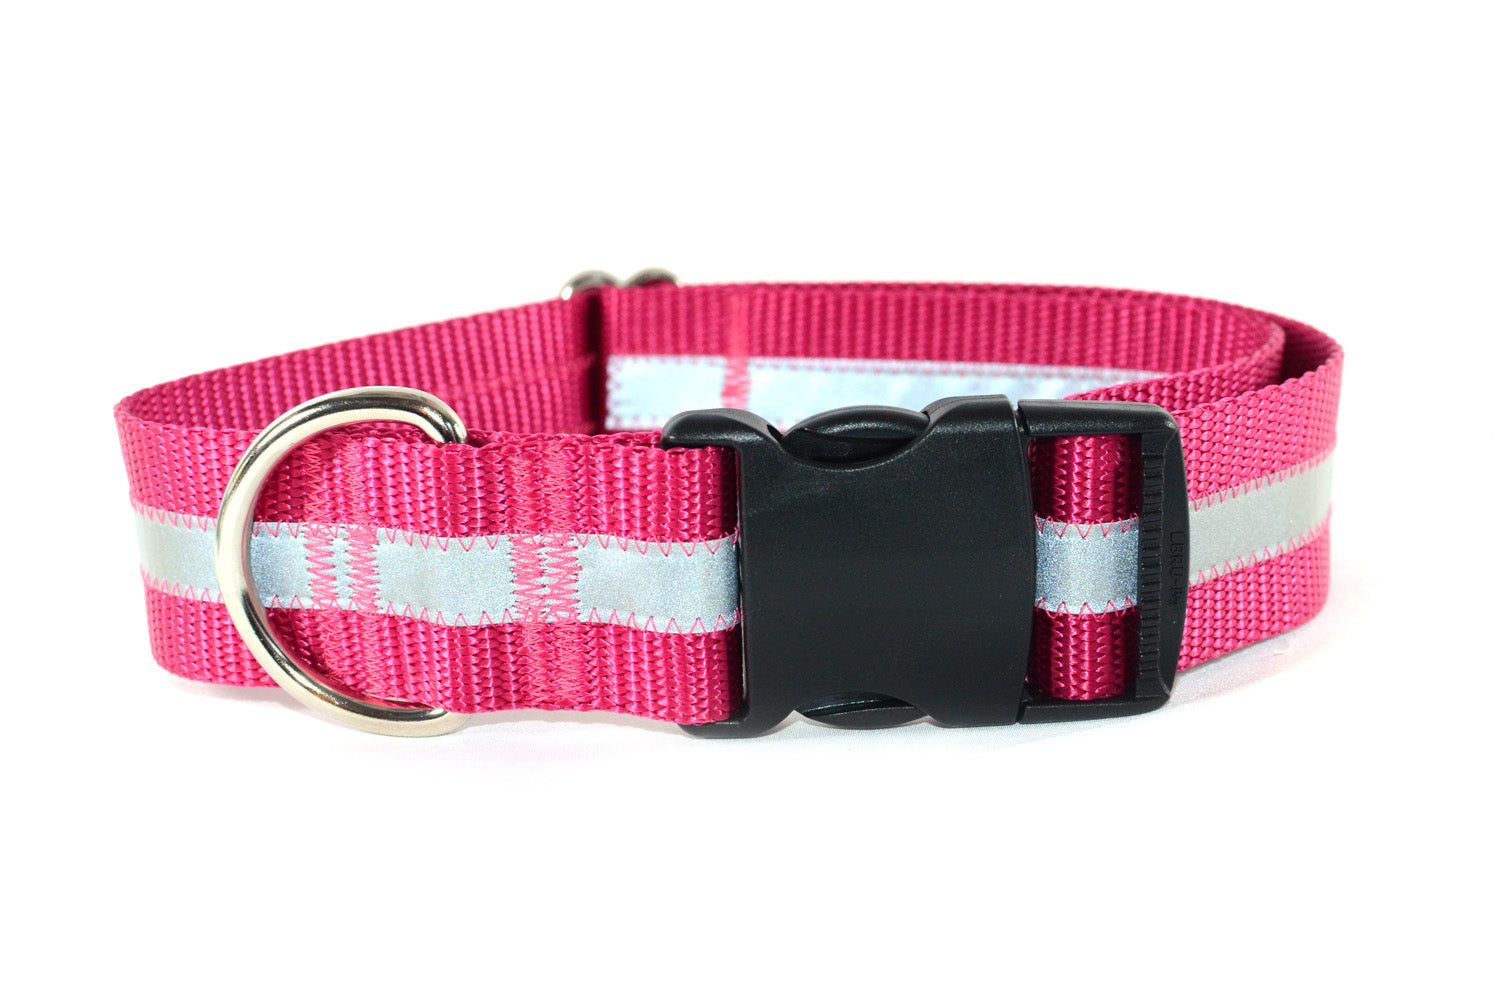 Flat Buckle / Adjustable Side Release Collar | Solid or Reflective | 4